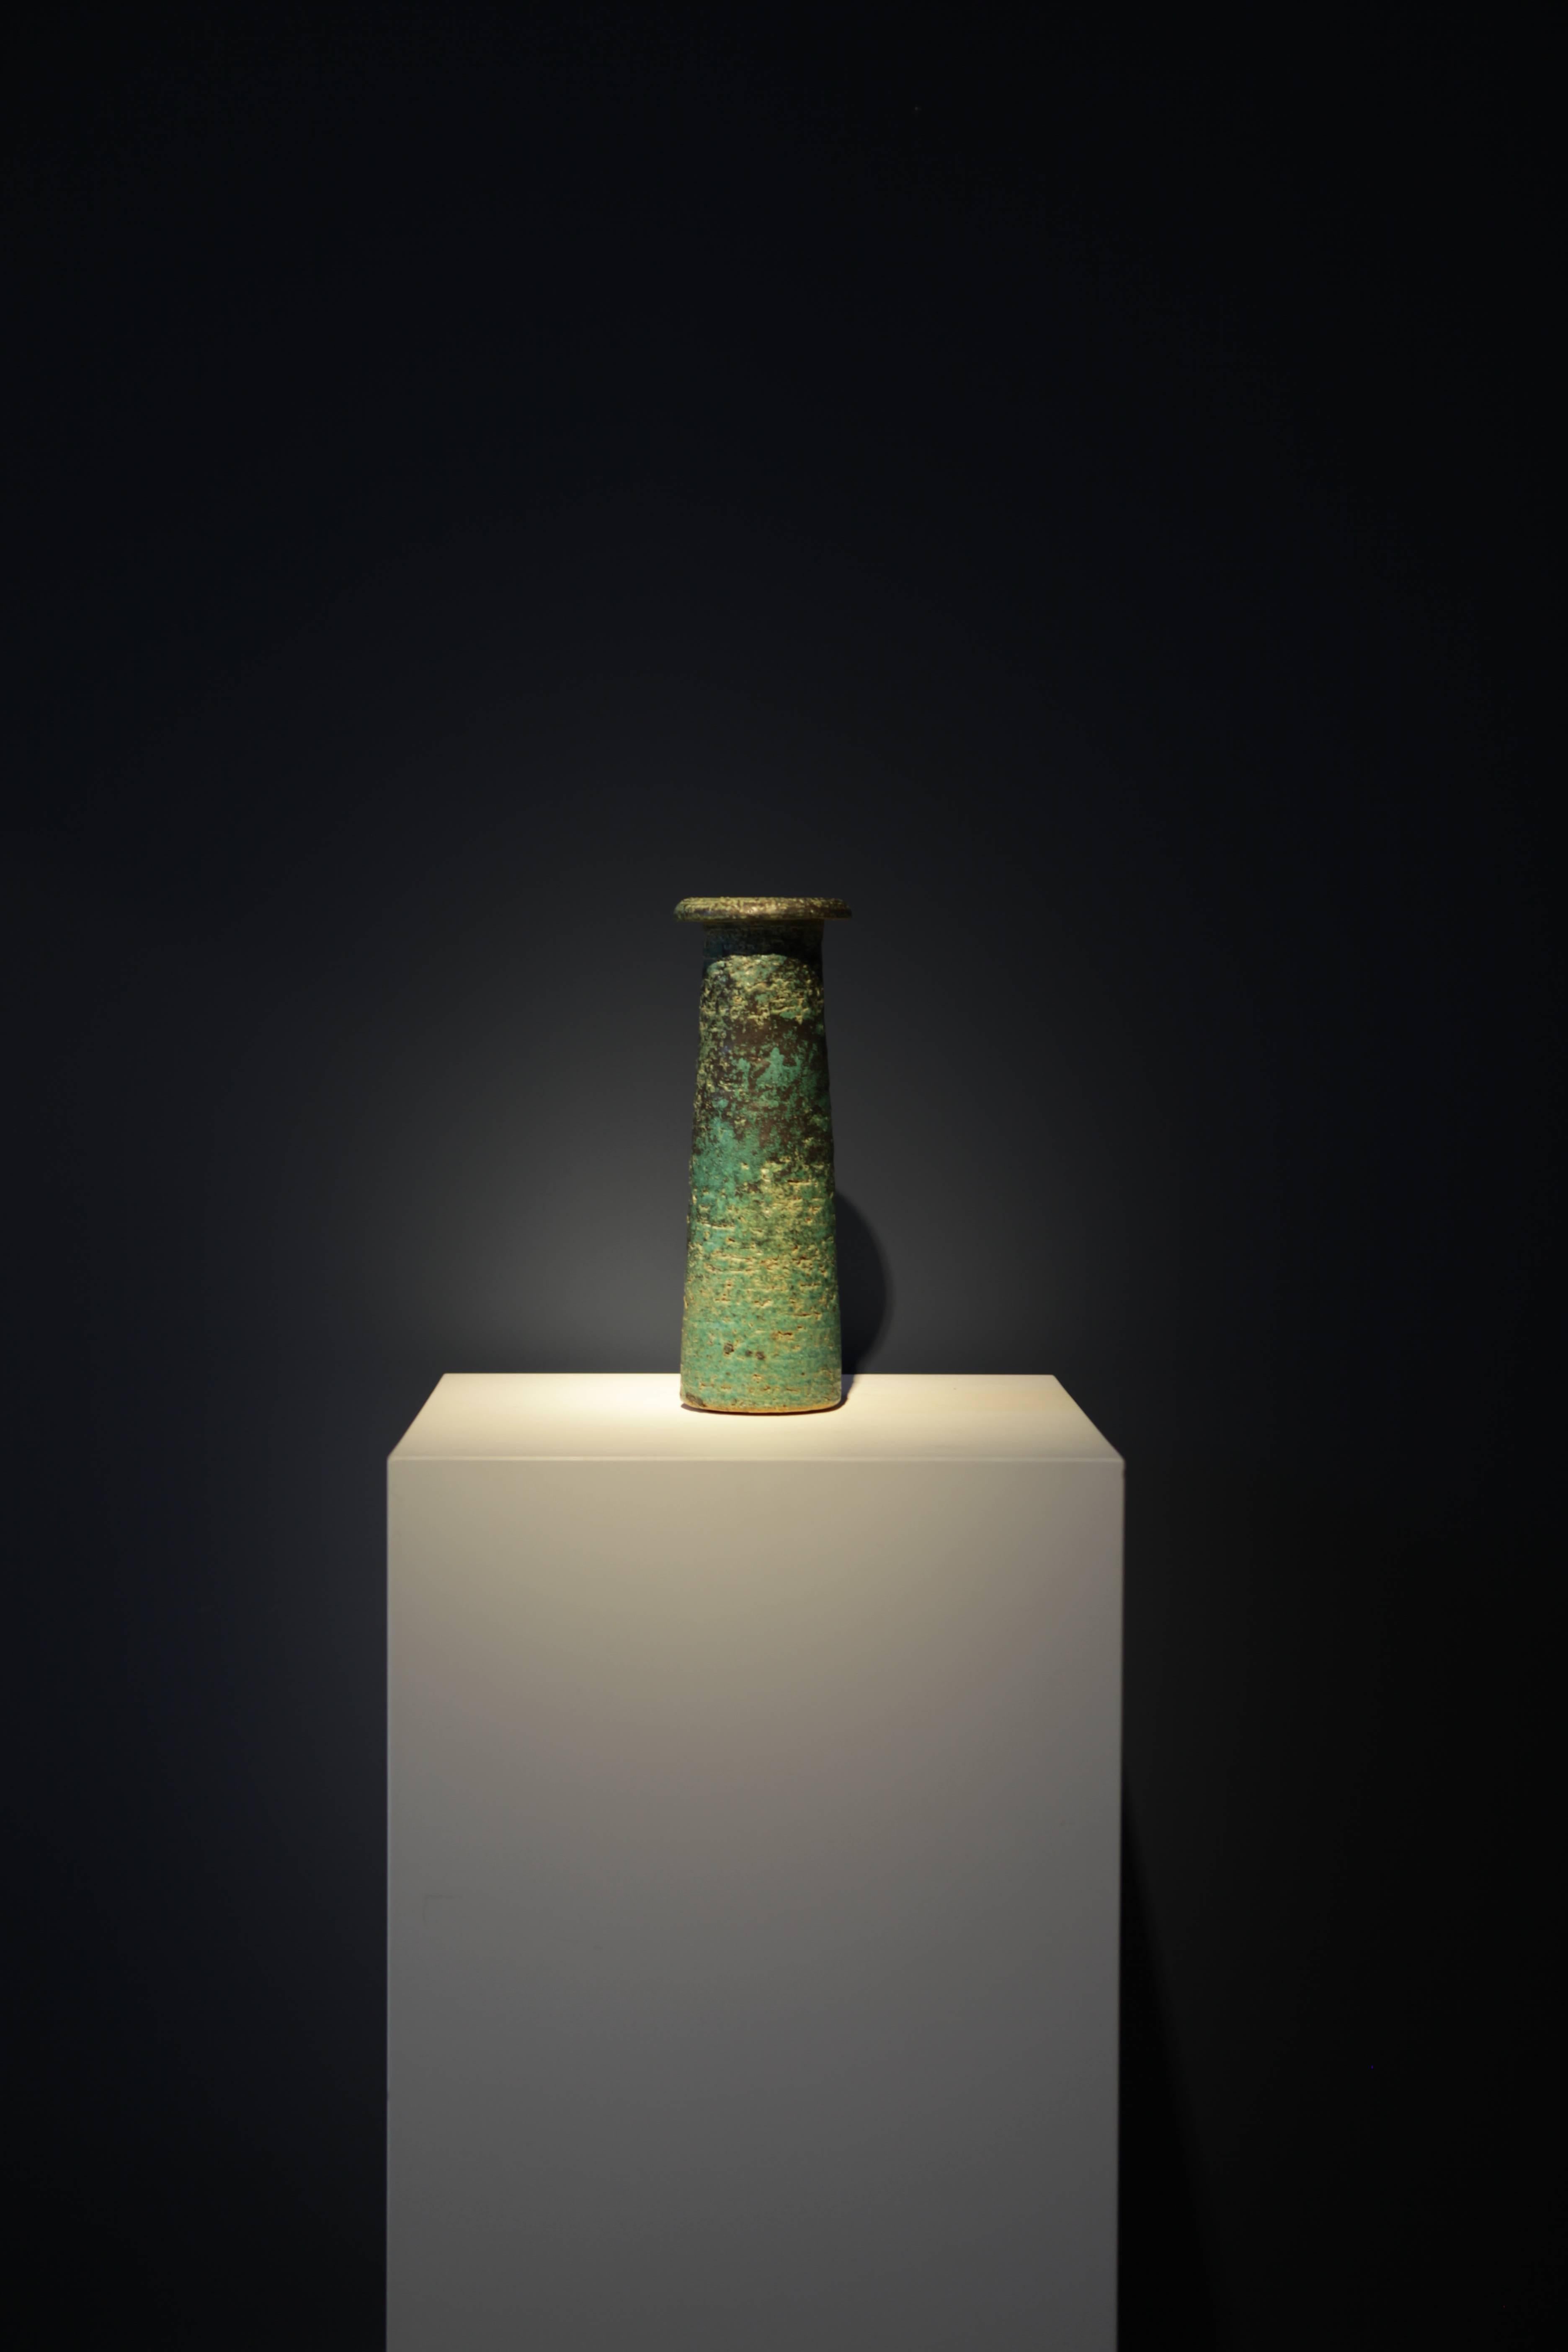 Annikki Hovisaari
Stoneware vase in rustic chamotte clay, natural turquoise glaze.
Made in Finland in 1960 at Arabia.
Signed to the underside 'AH' Arabia.